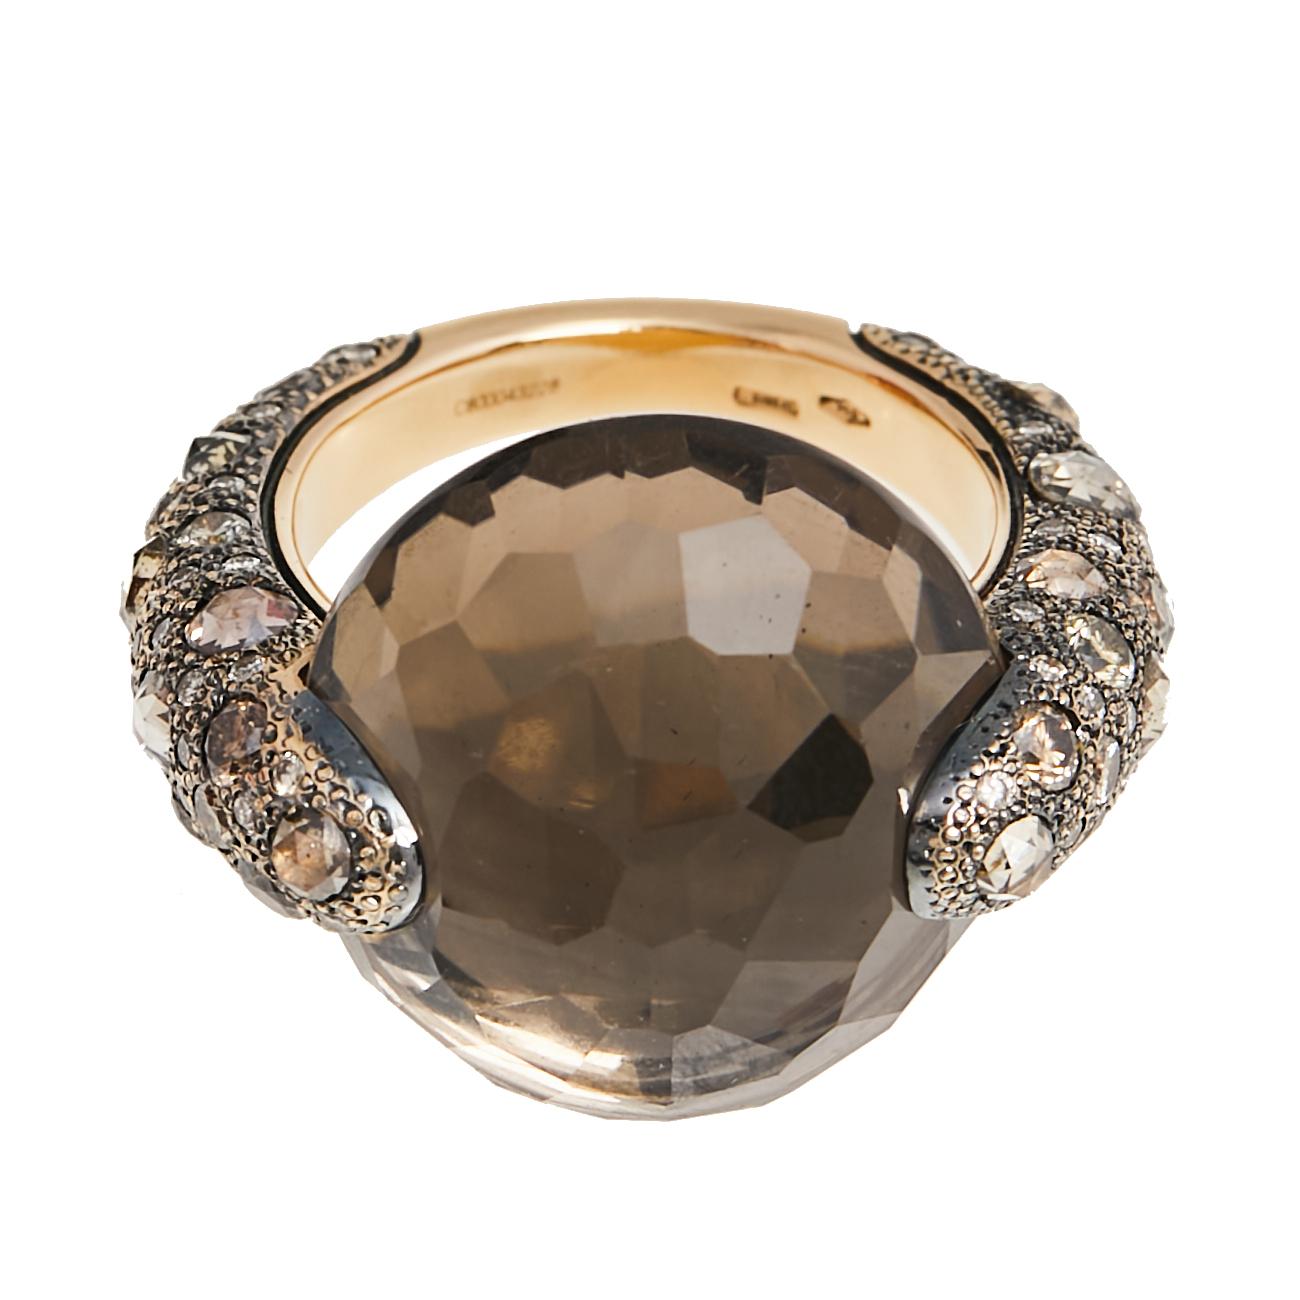 Pomellato's commitment to delivering excellence is beautifully manifested in this cocktail ring. Every detail on this Tango speaks creativity, elegance, and luxury. Rendered in a remarkable silhouette with notably-sized, faceted quartz on the head